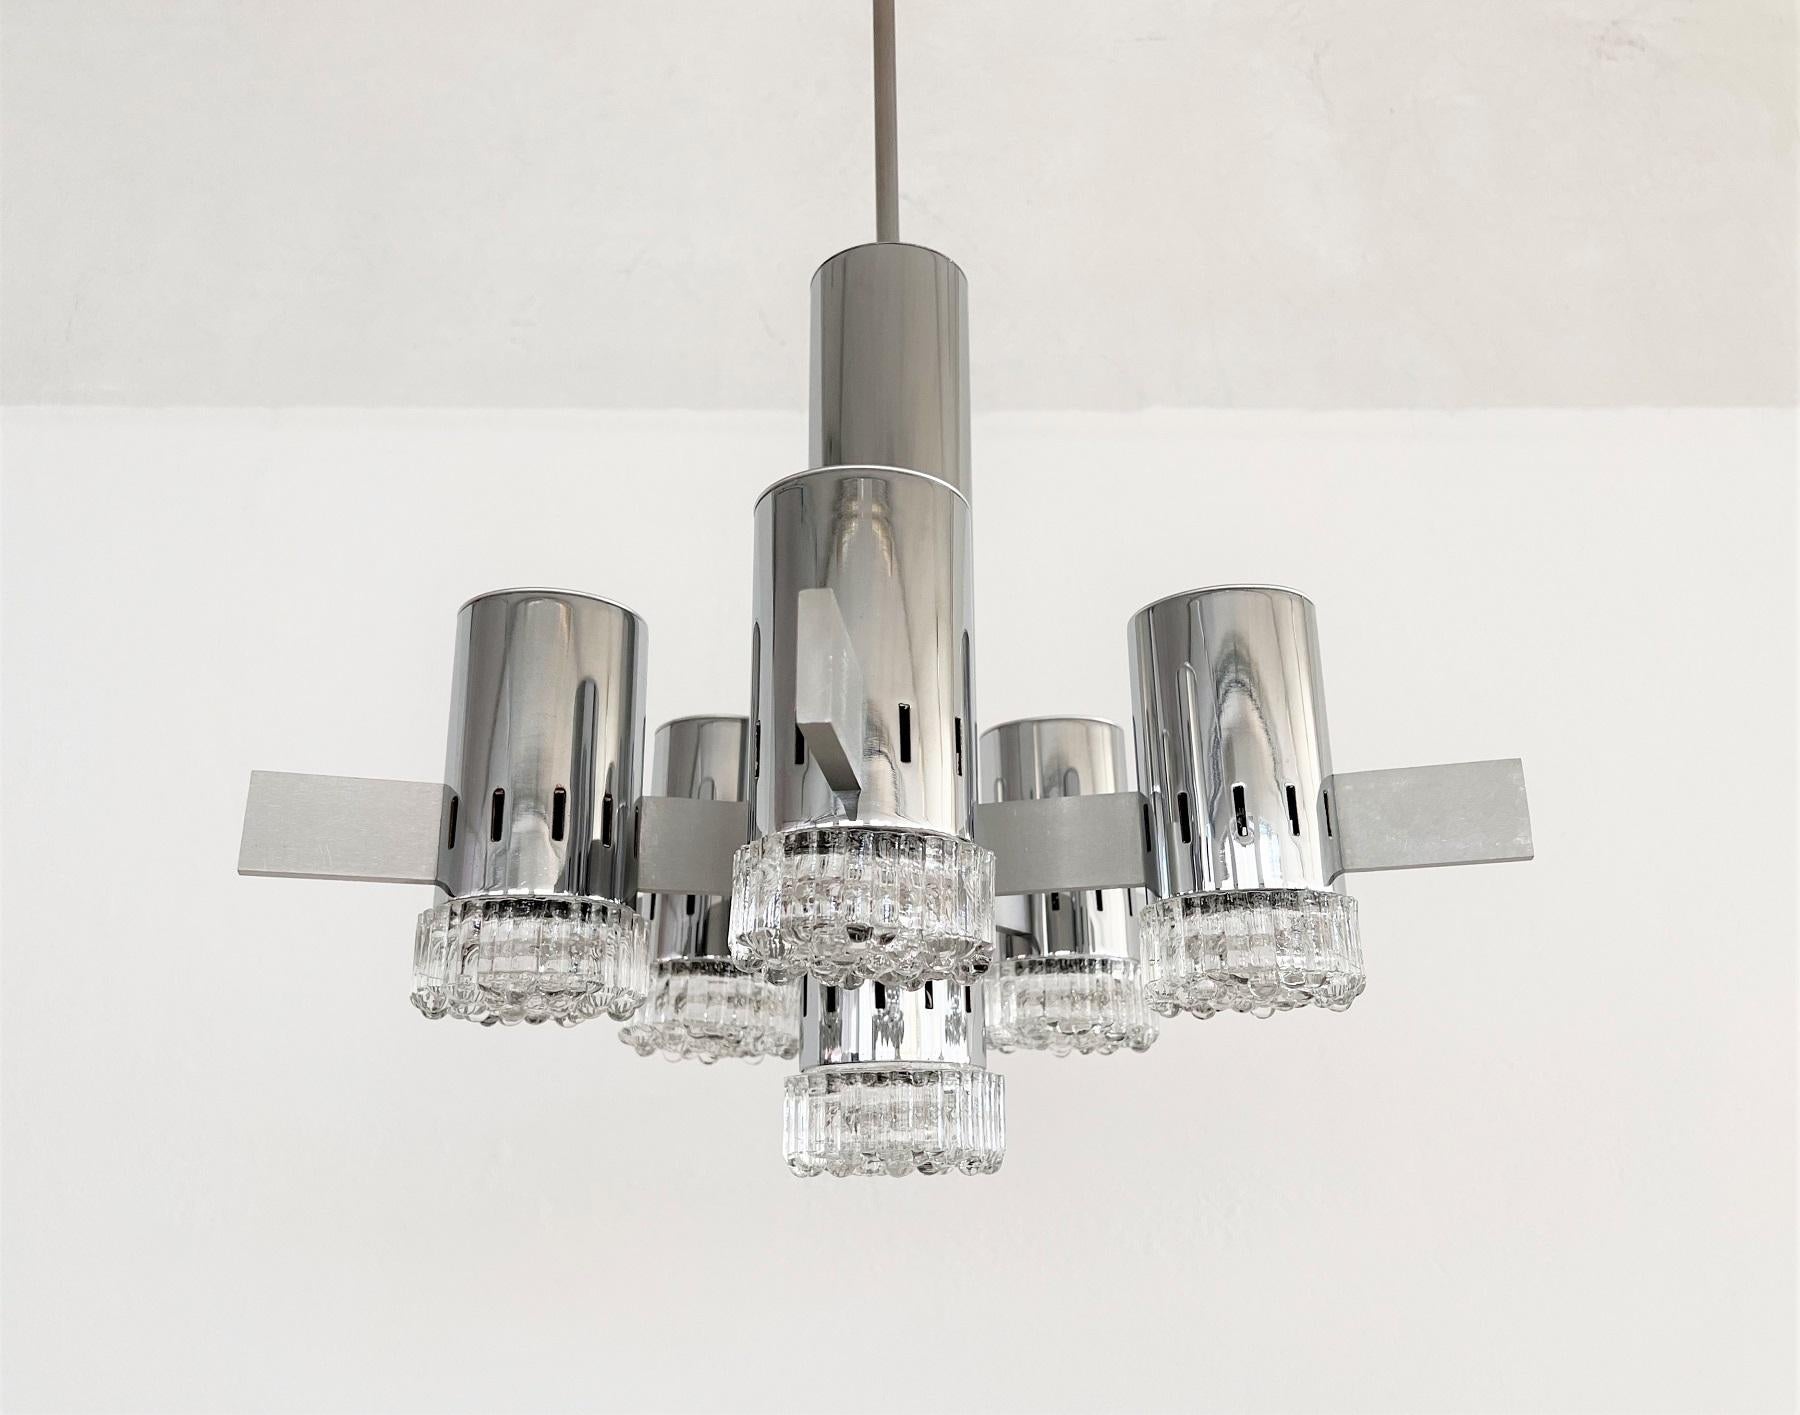 Gorgeous 6-lights chandelier made of chromed metal and aluminium in Italy during the 1960s designed by Gaetano Sciolari.
The 6-arm star-shaped or Sputnik chandelier is equipped with 6 transparent round 